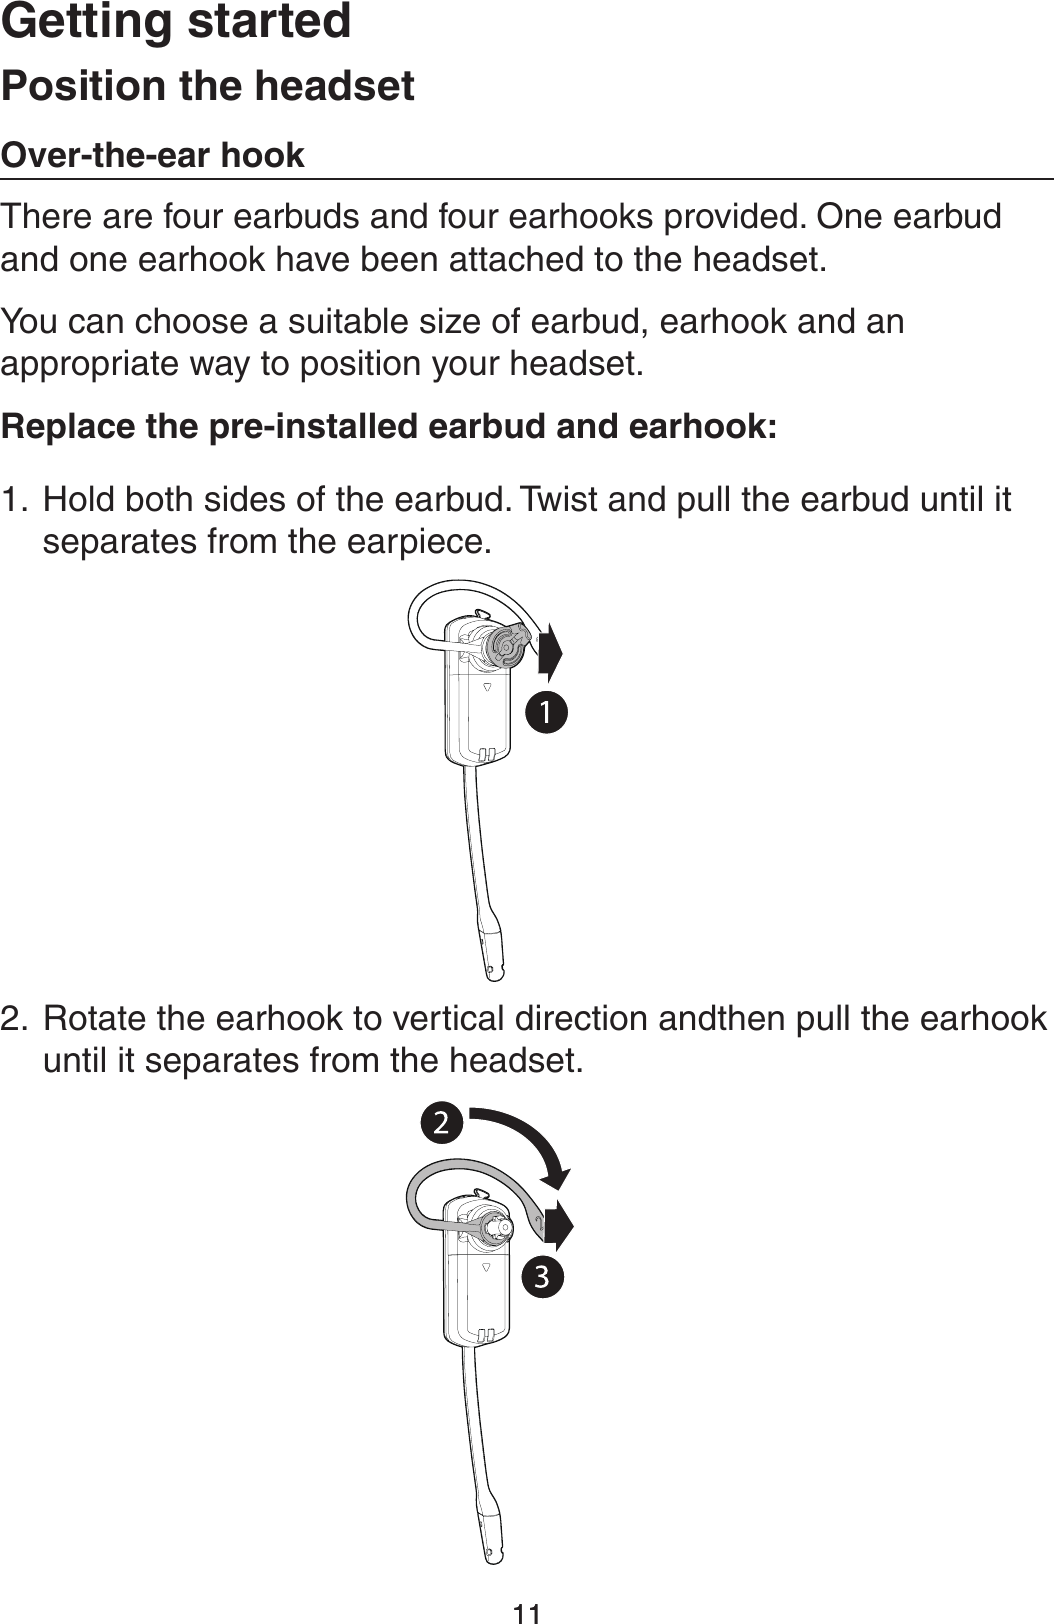 1111(FUUJOHTUBSUFE1PTJUJPOUIFIFBETFU0WFSUIFFBSIPPLThere are four earbuds and four earhooks provided. One earbud and one earhook have been attached to the headset.You can choose a suitable size of earbud, earhook and an appropriate way to position your headset.3FQMBDFUIFQSFJOTUBMMFEFBSCVEBOEFBSIPPLHold both sides of the earbud. Twist and pull the earbud until it separates from the earpiece.Rotate the earhook to vertical direction andthen pull the earhook until it separates from the headset.1.2.